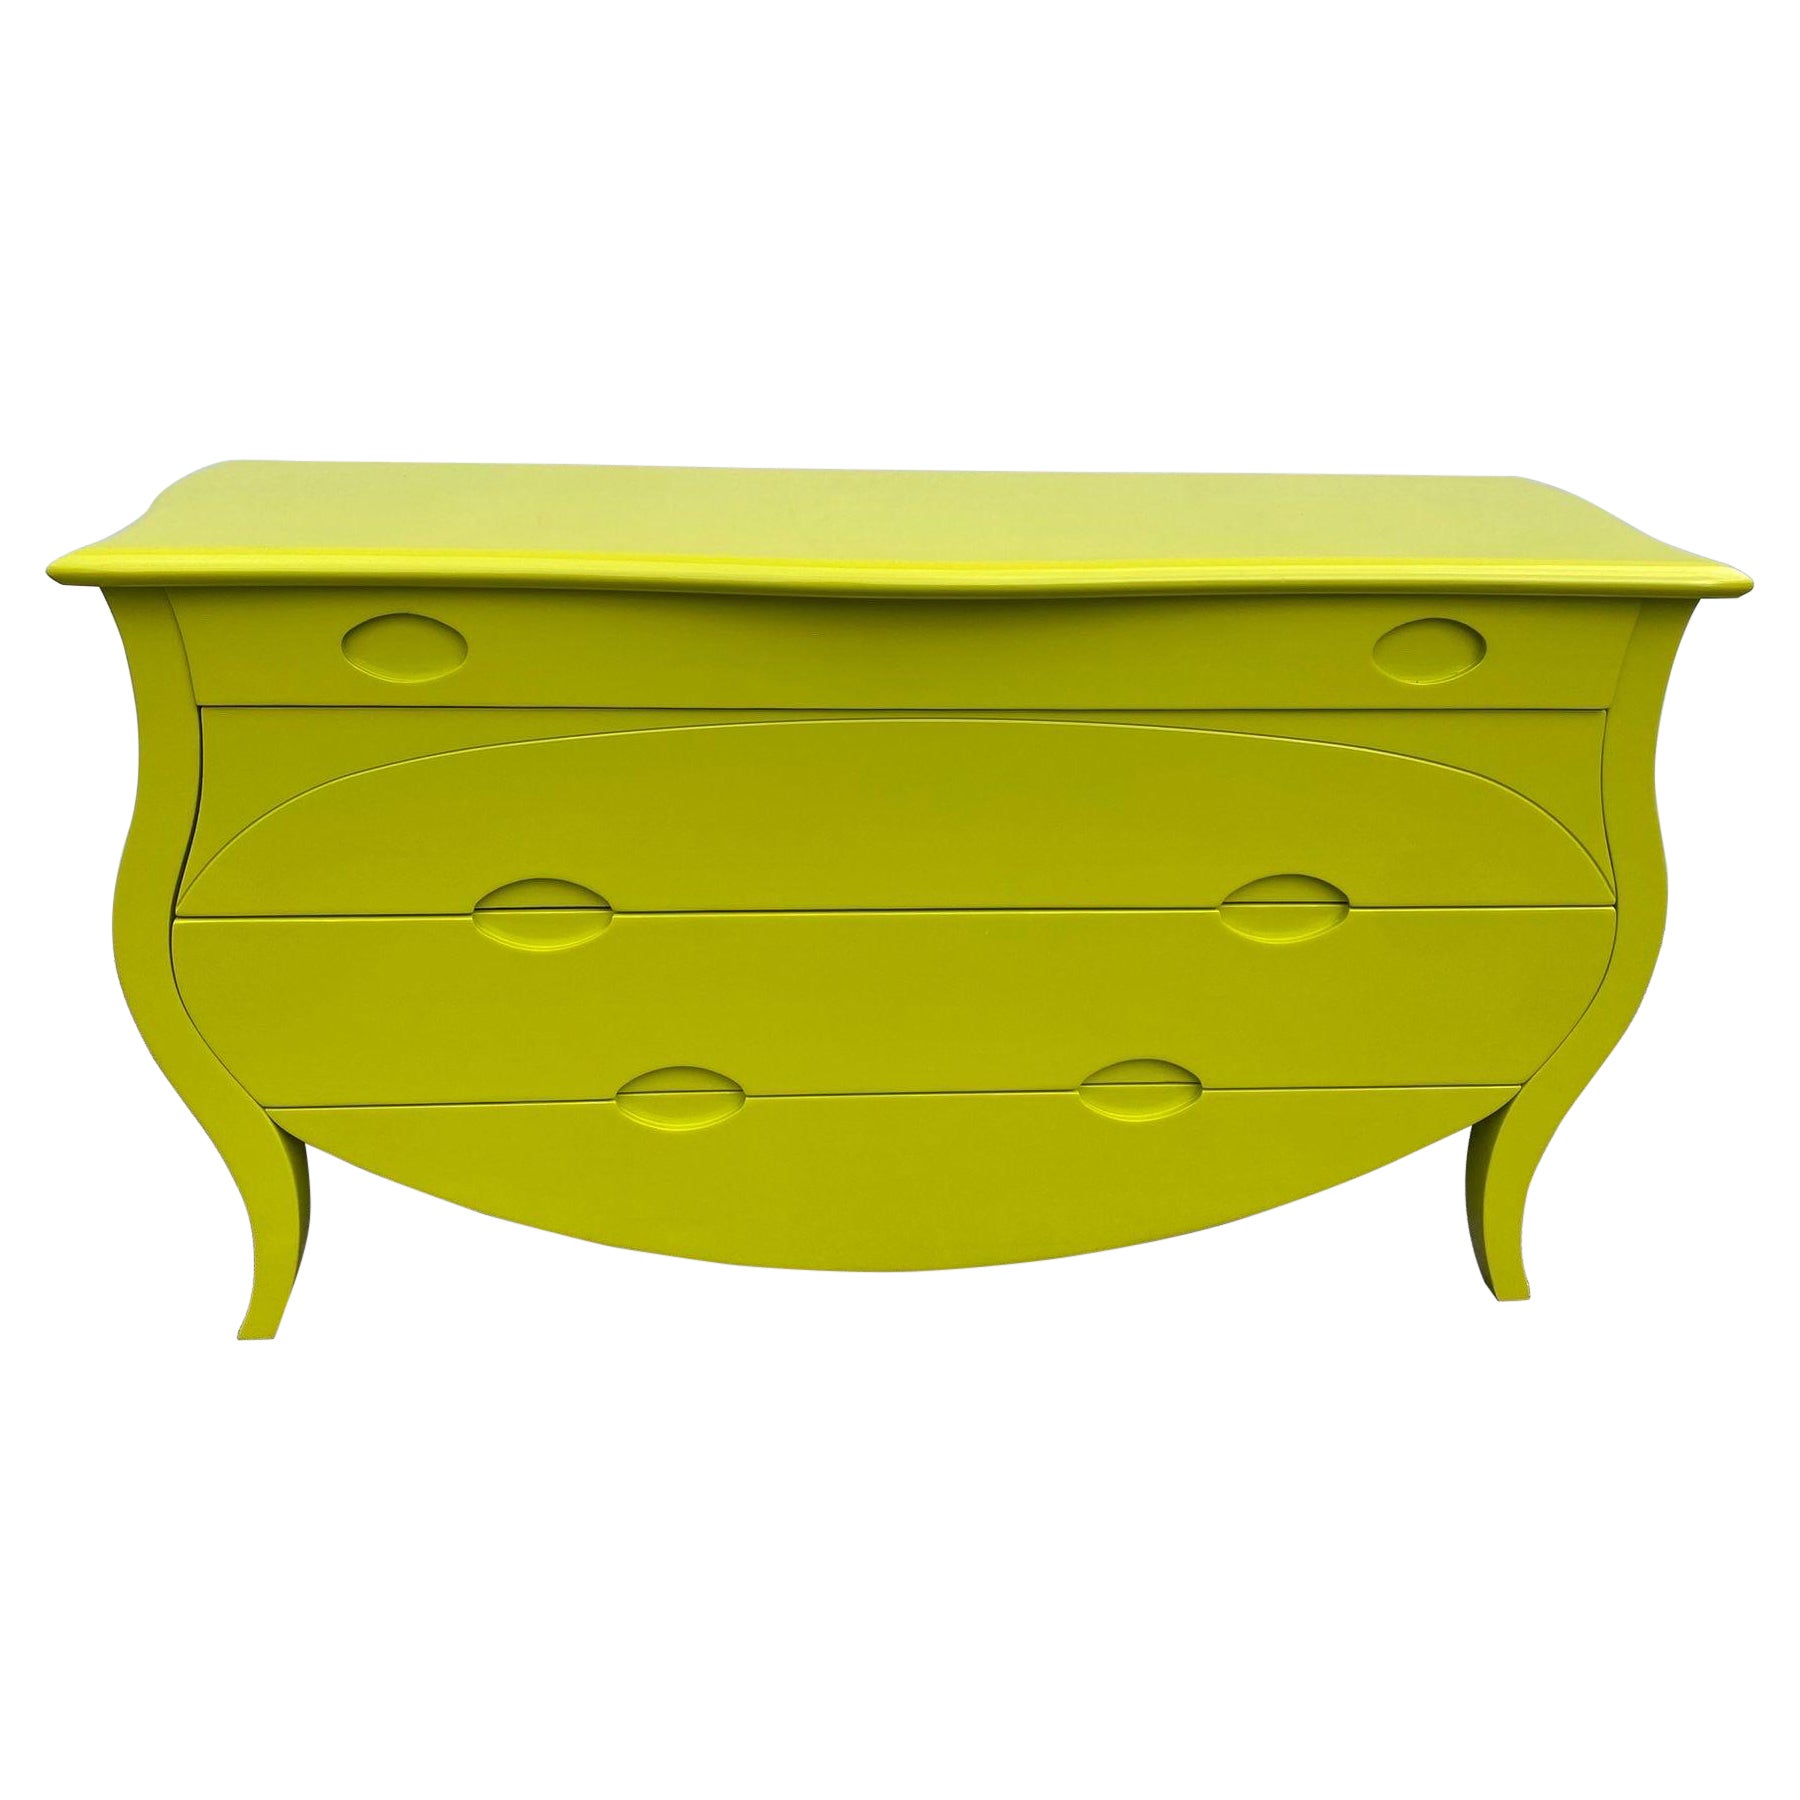 Elegant Chartreuse Bombay Style Commode/ Chest of Drawers